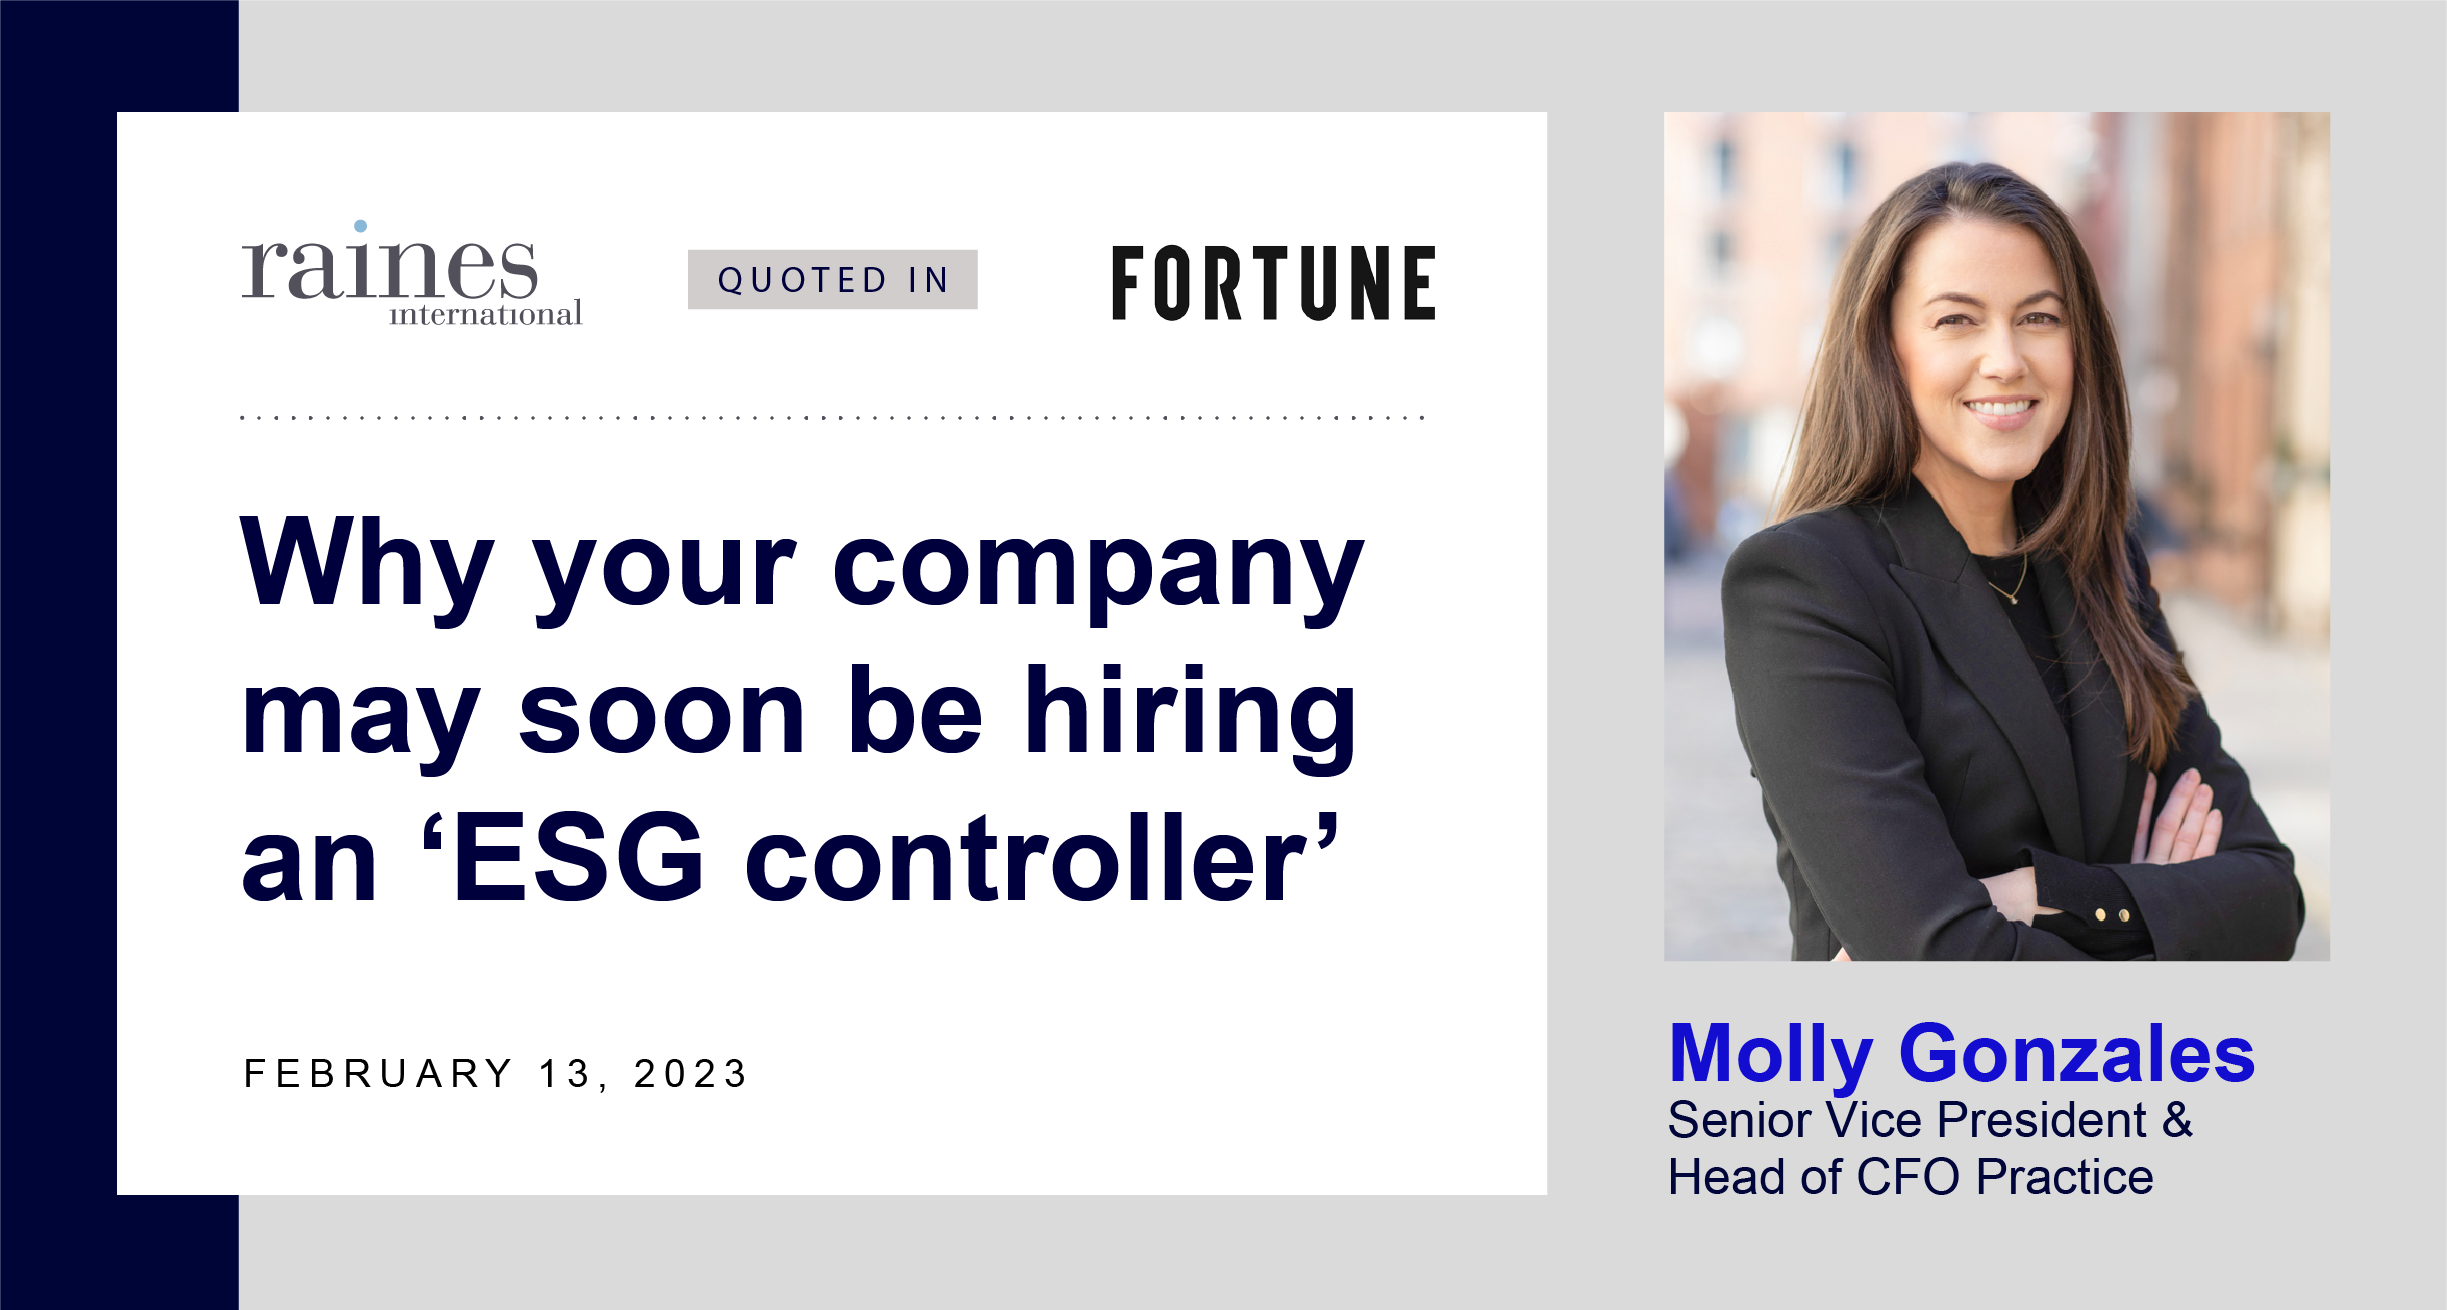 Molly Gonzales, head of CFO Financial Officers Practice for Raines, headshot, with headline from Fortune